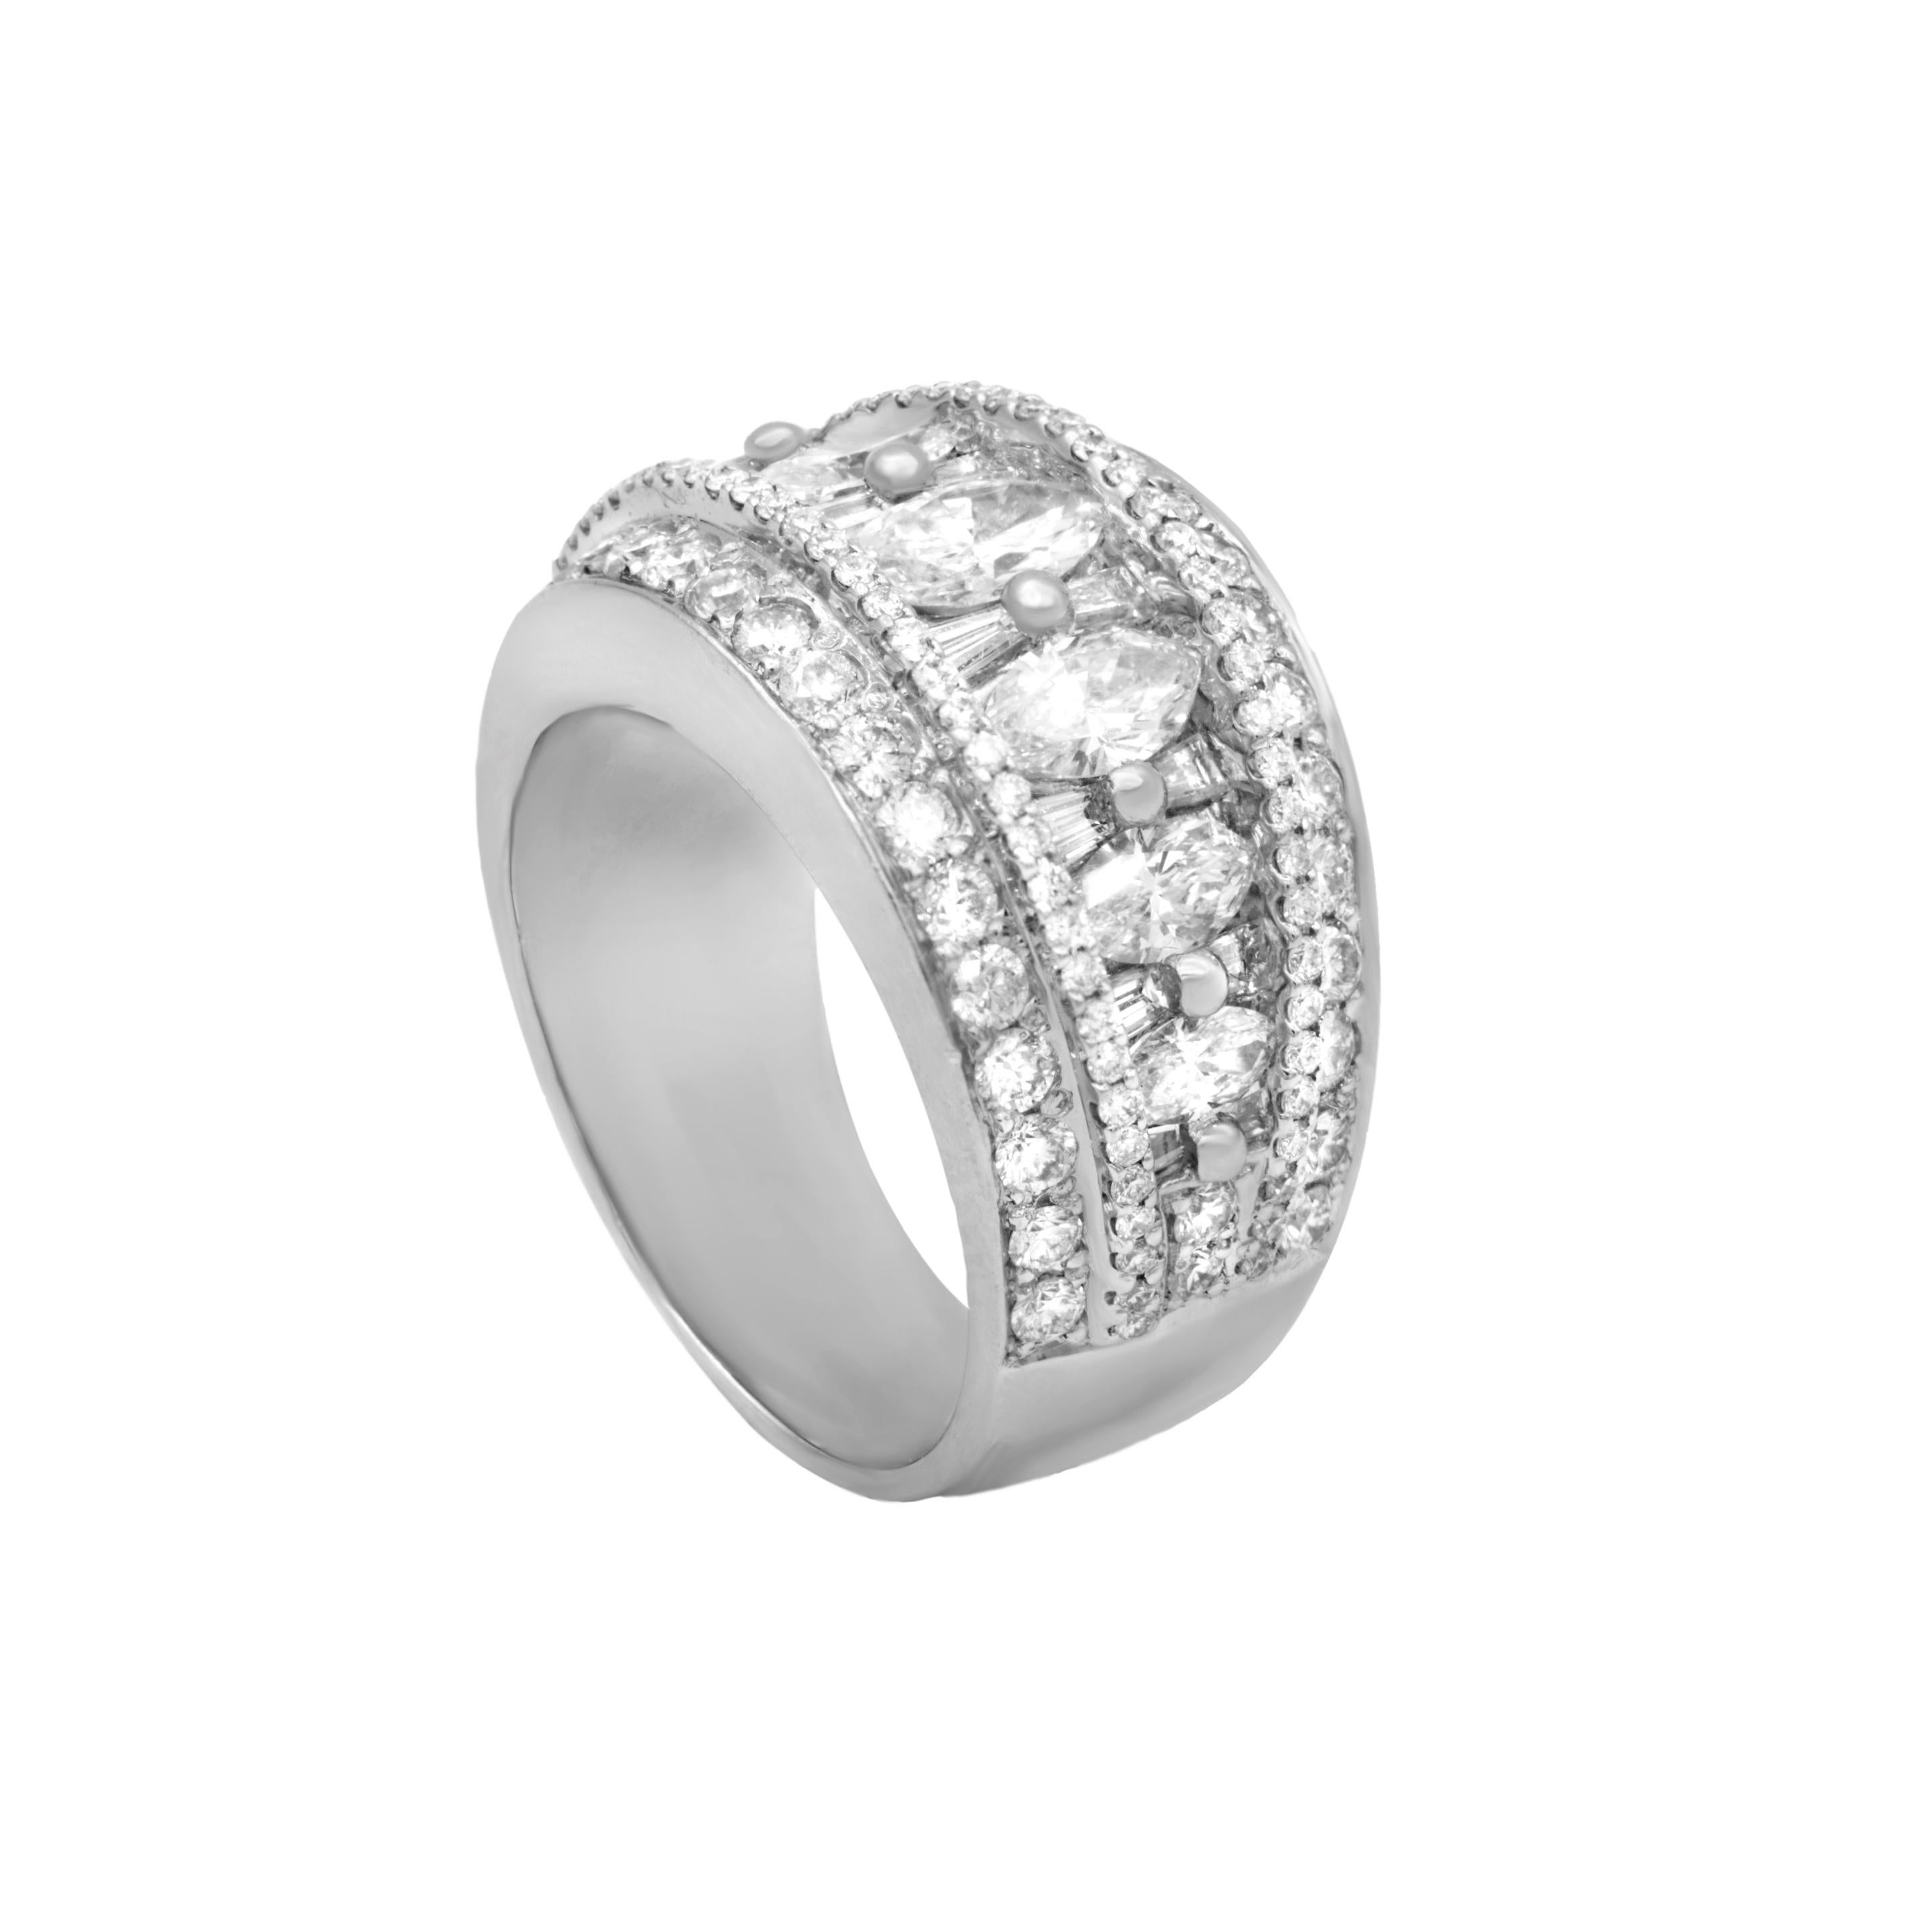 Platinum diamond band adorned with rows of marquise cut, baguette cut, and round diamonds going half way around totaling 4.25 cts of diamonds
Diana M. is a leading supplier of top-quality fine jewelry for over 35 years.
Diana M is one-stop shop for